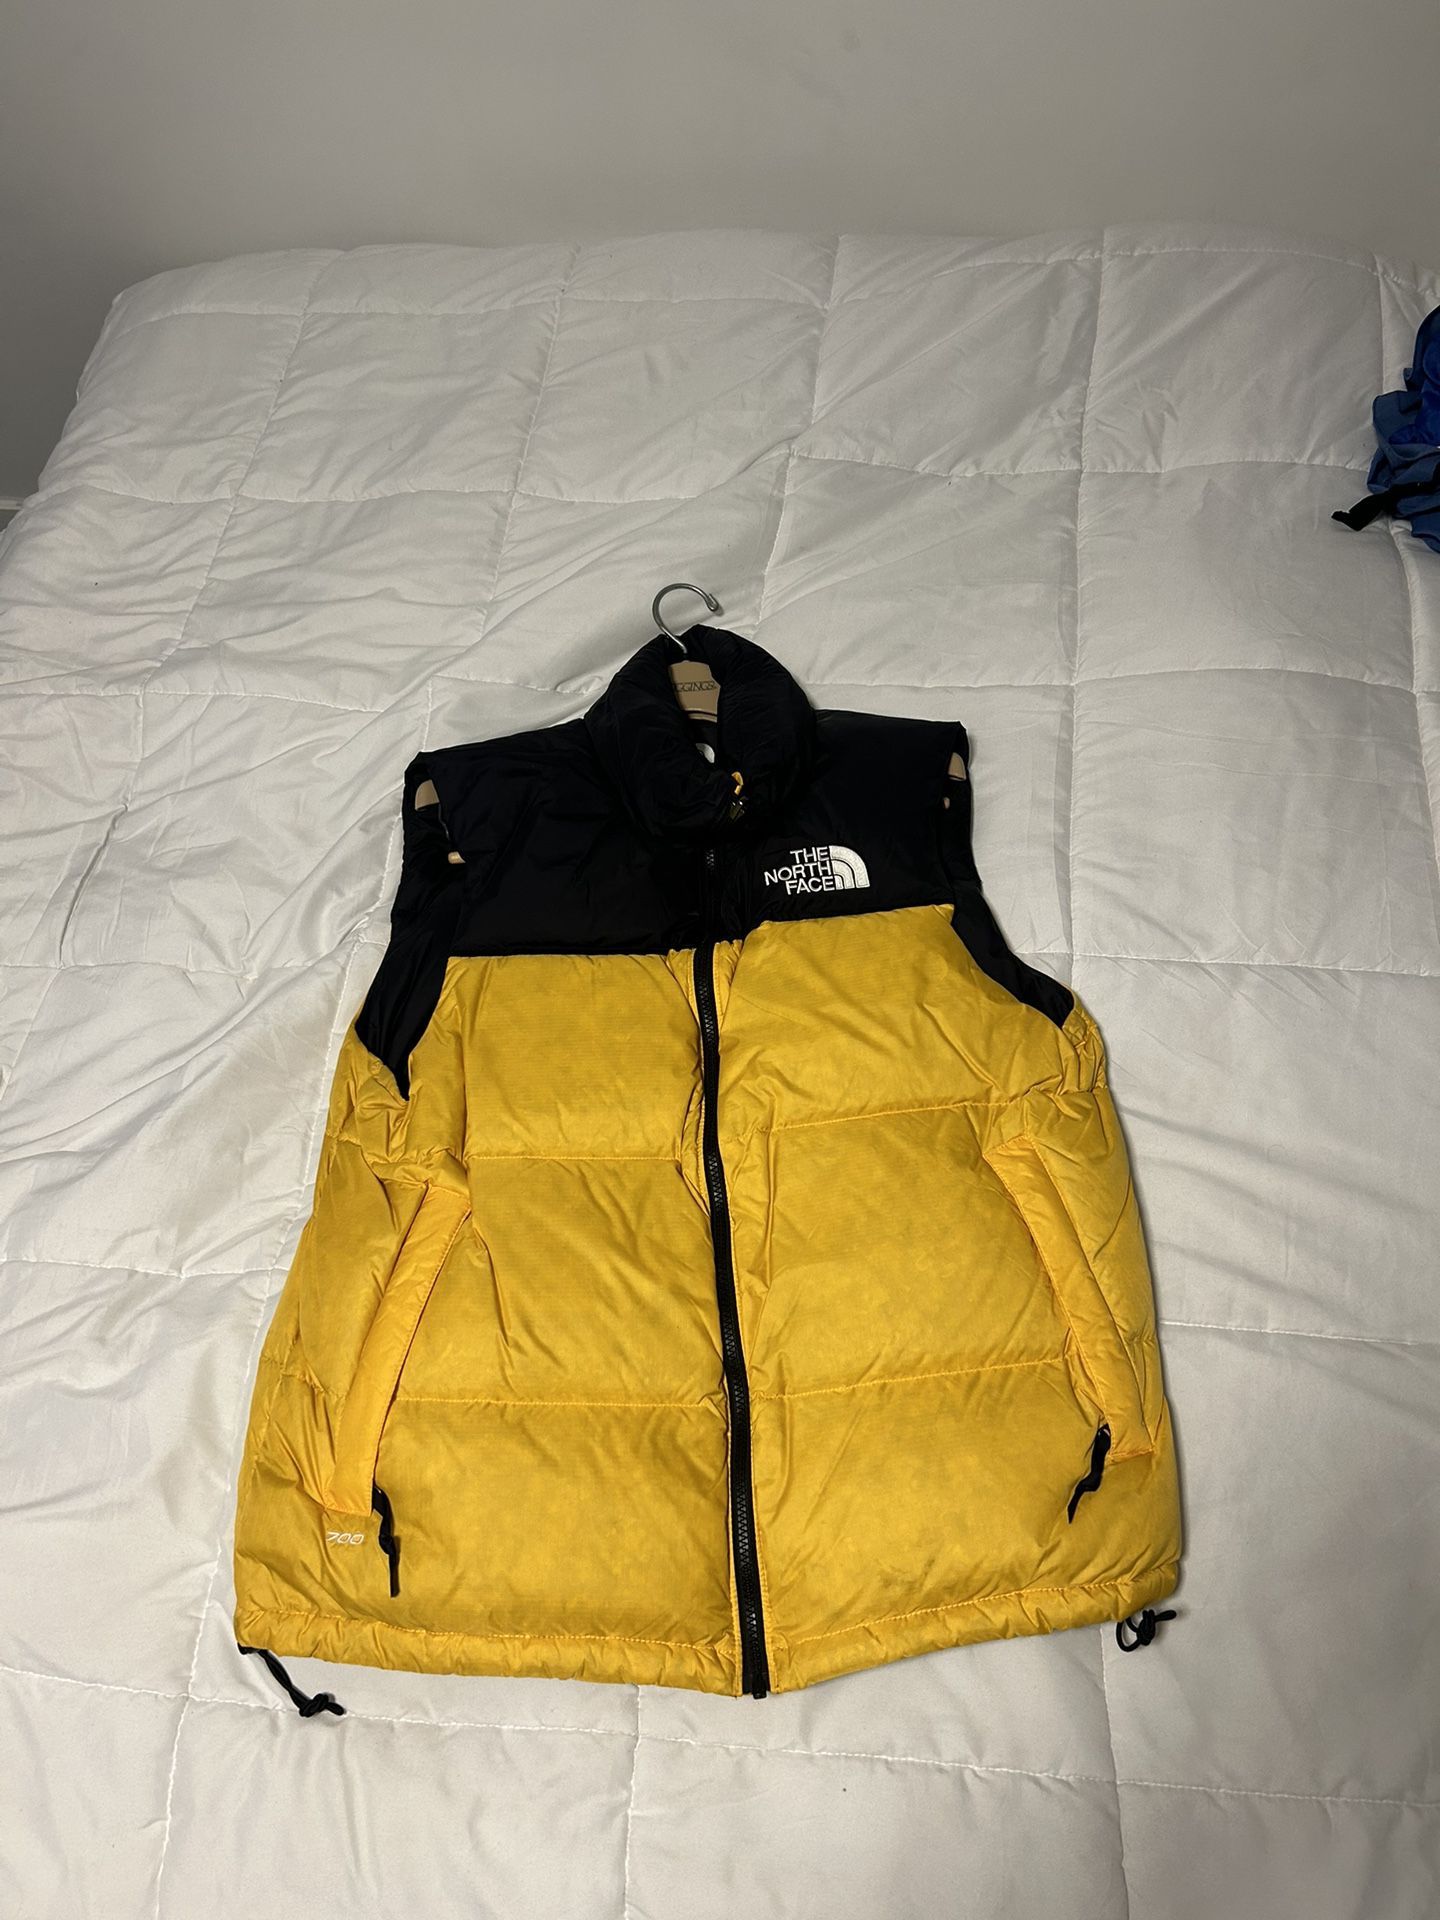 North Face Puffer Vest 